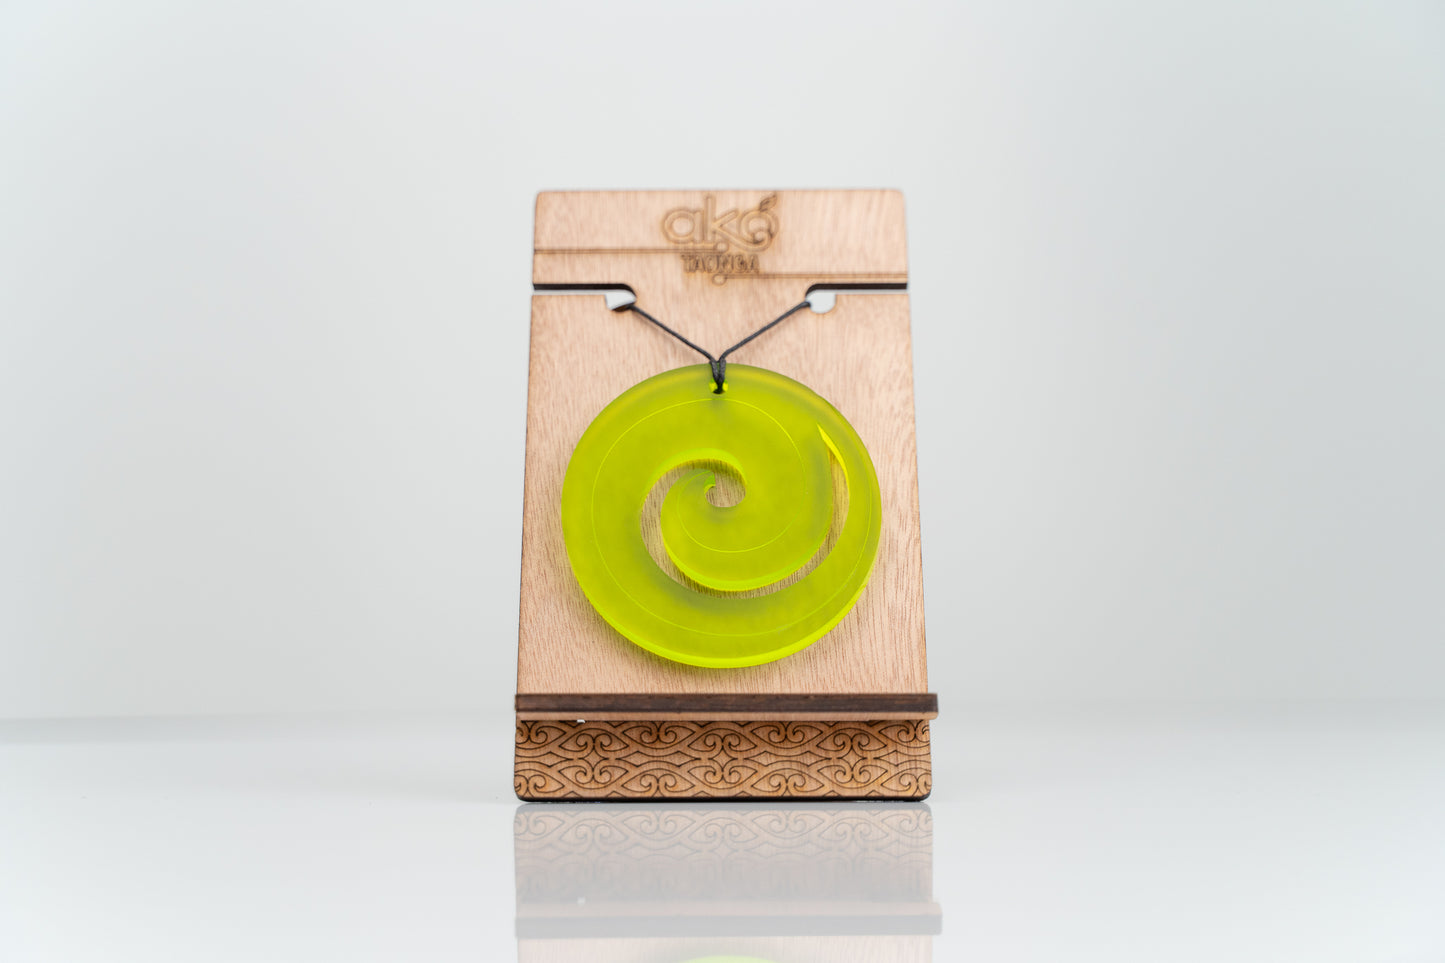 Mauri (Life Force) - Small Necklace